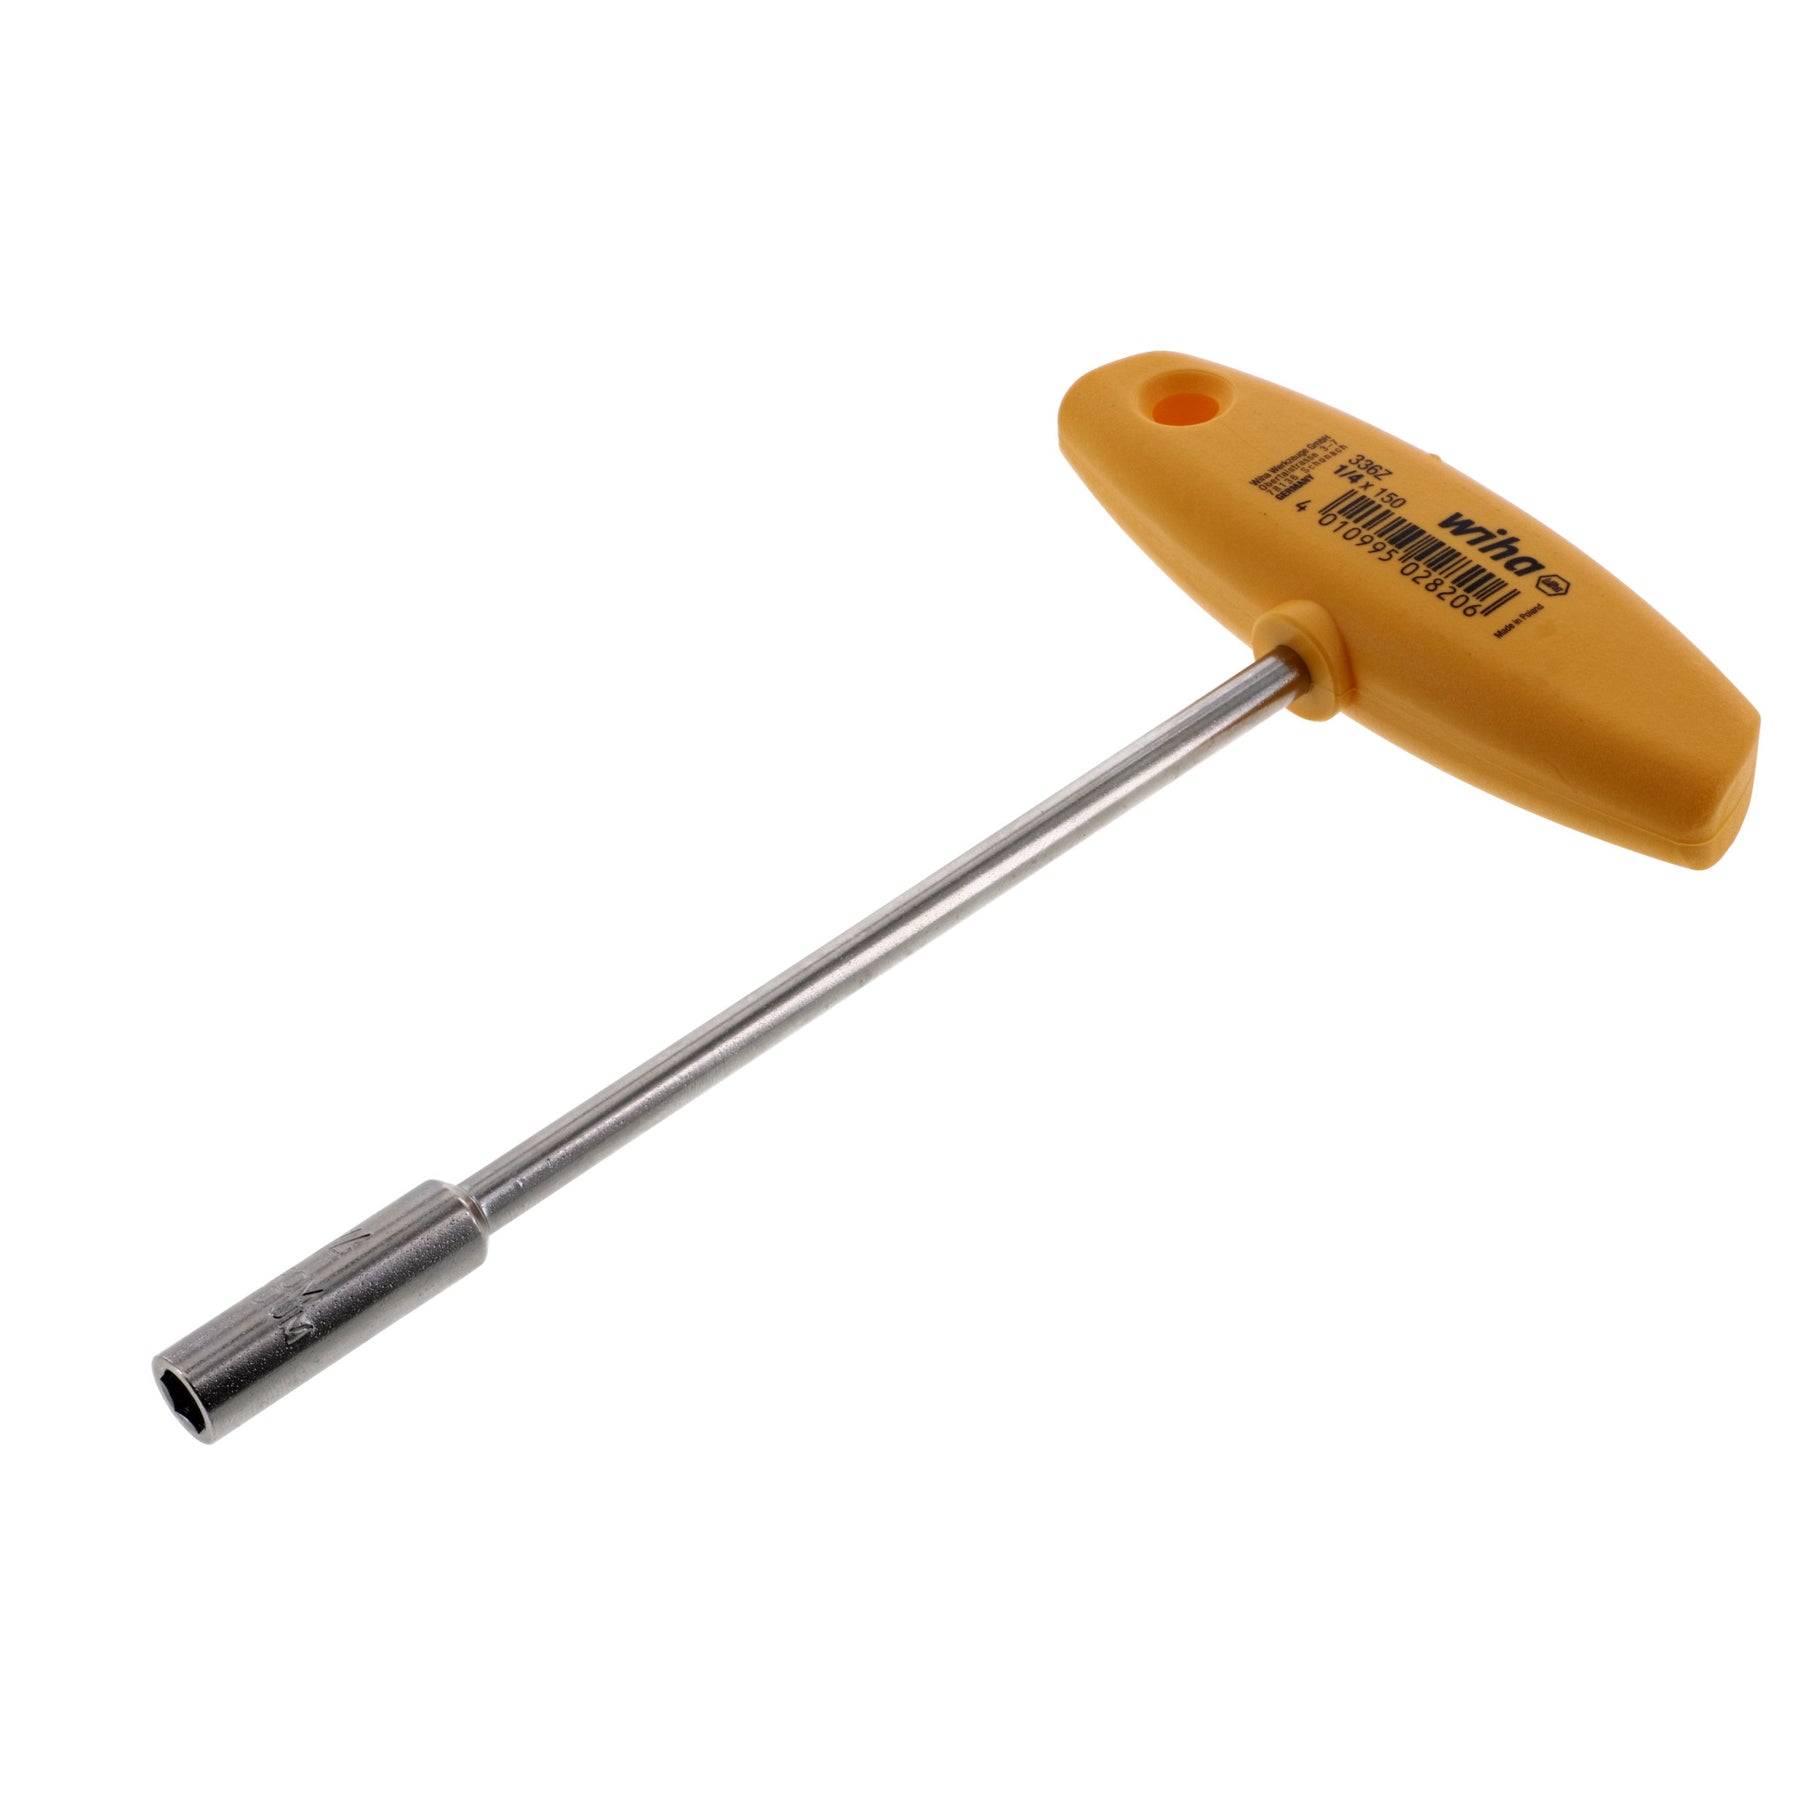 Classic Grip T-Handle Nut Driver 1/4"